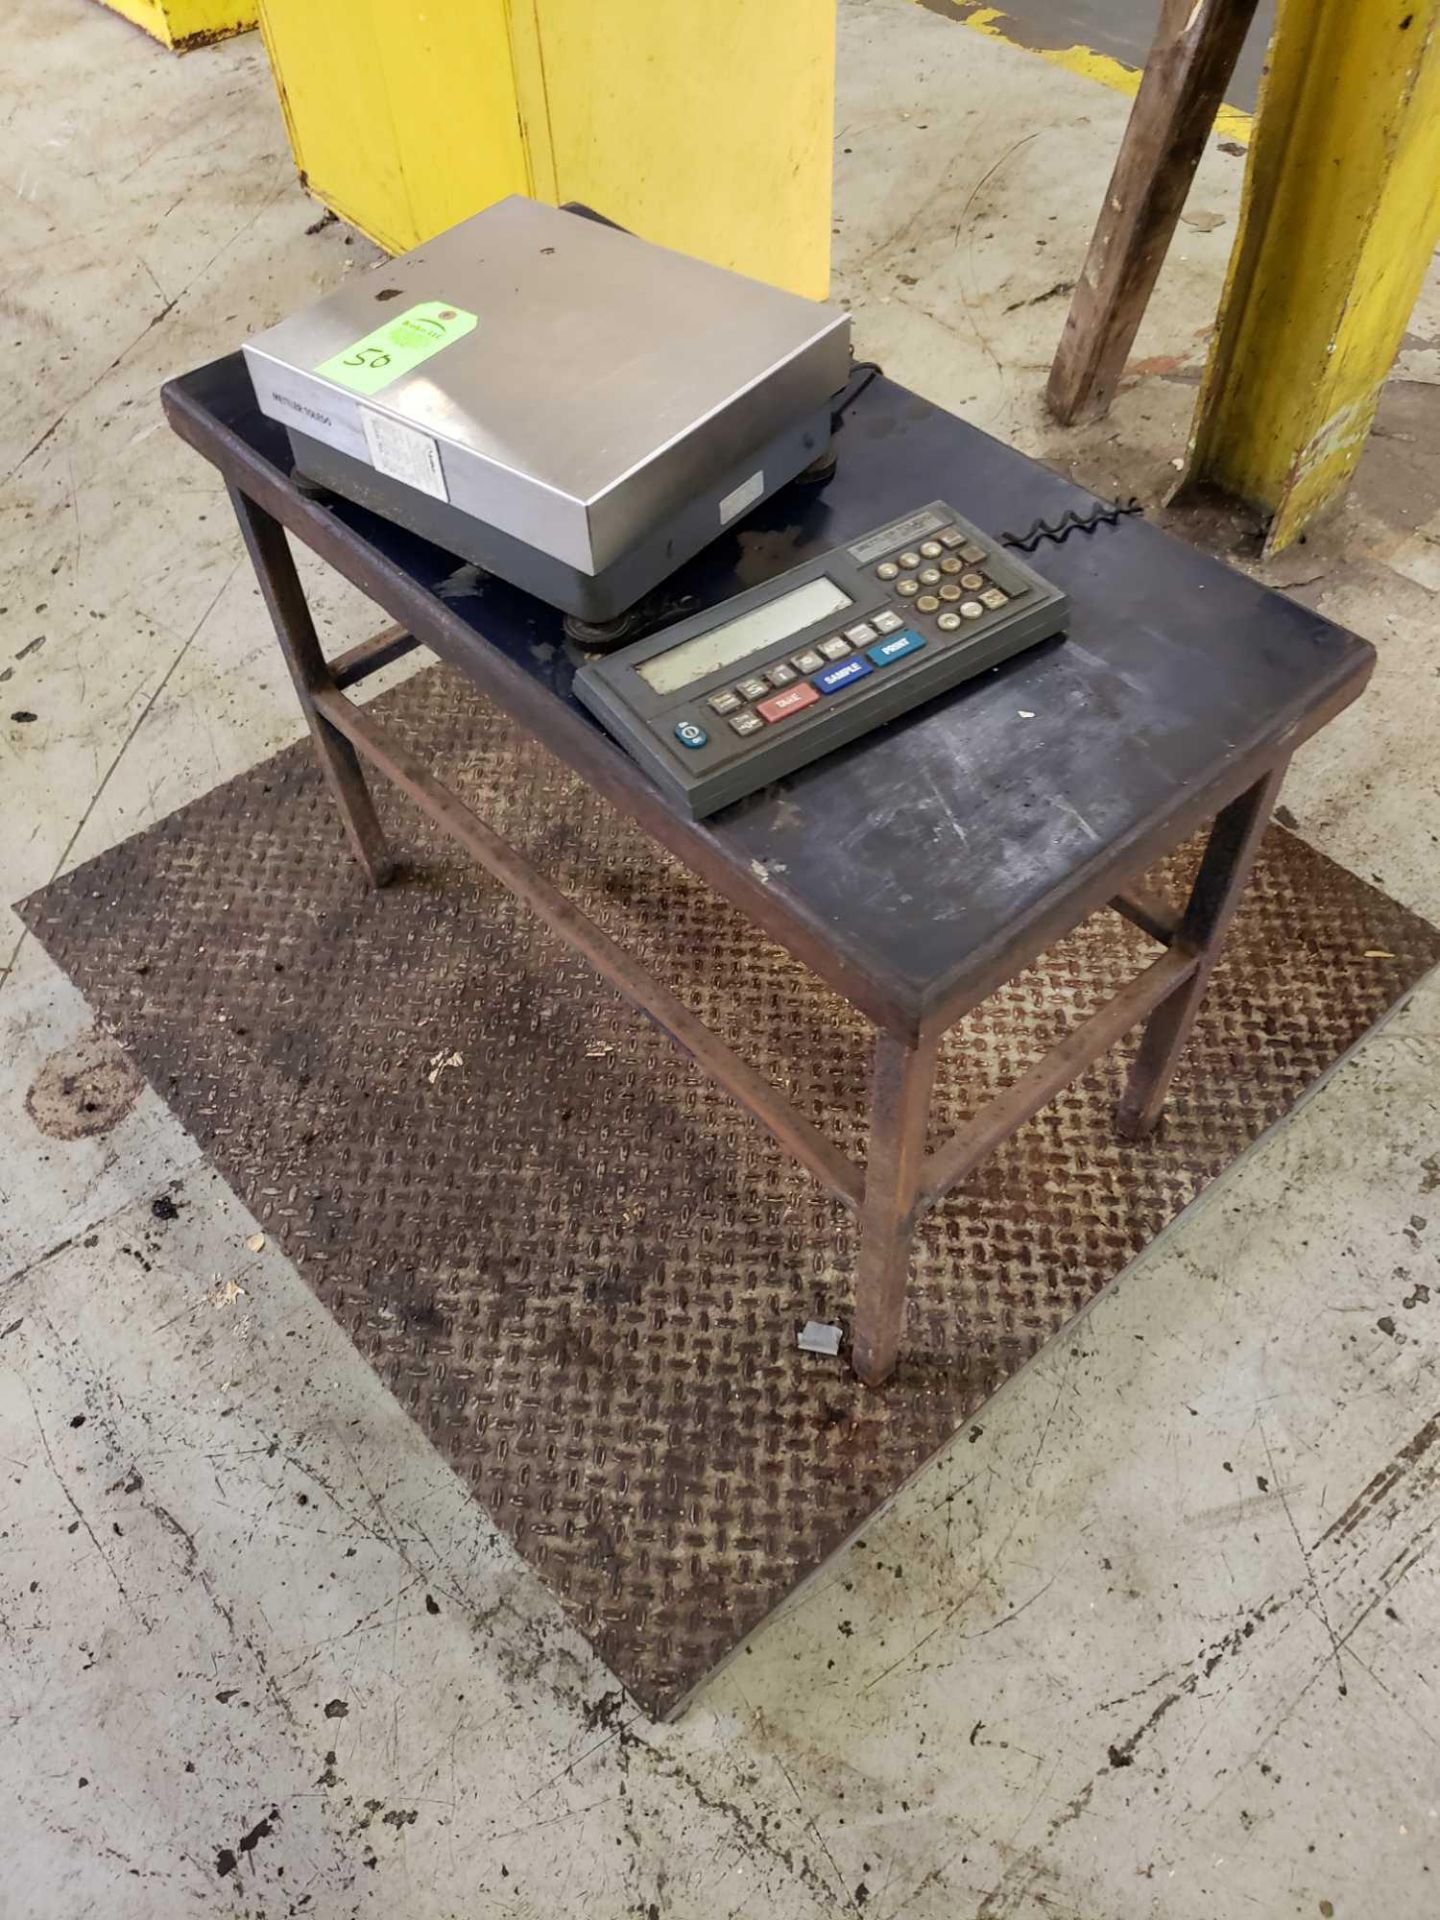 Mettler Toledo Platform shipping scale with tabletop unit included. SC30 digital read out.